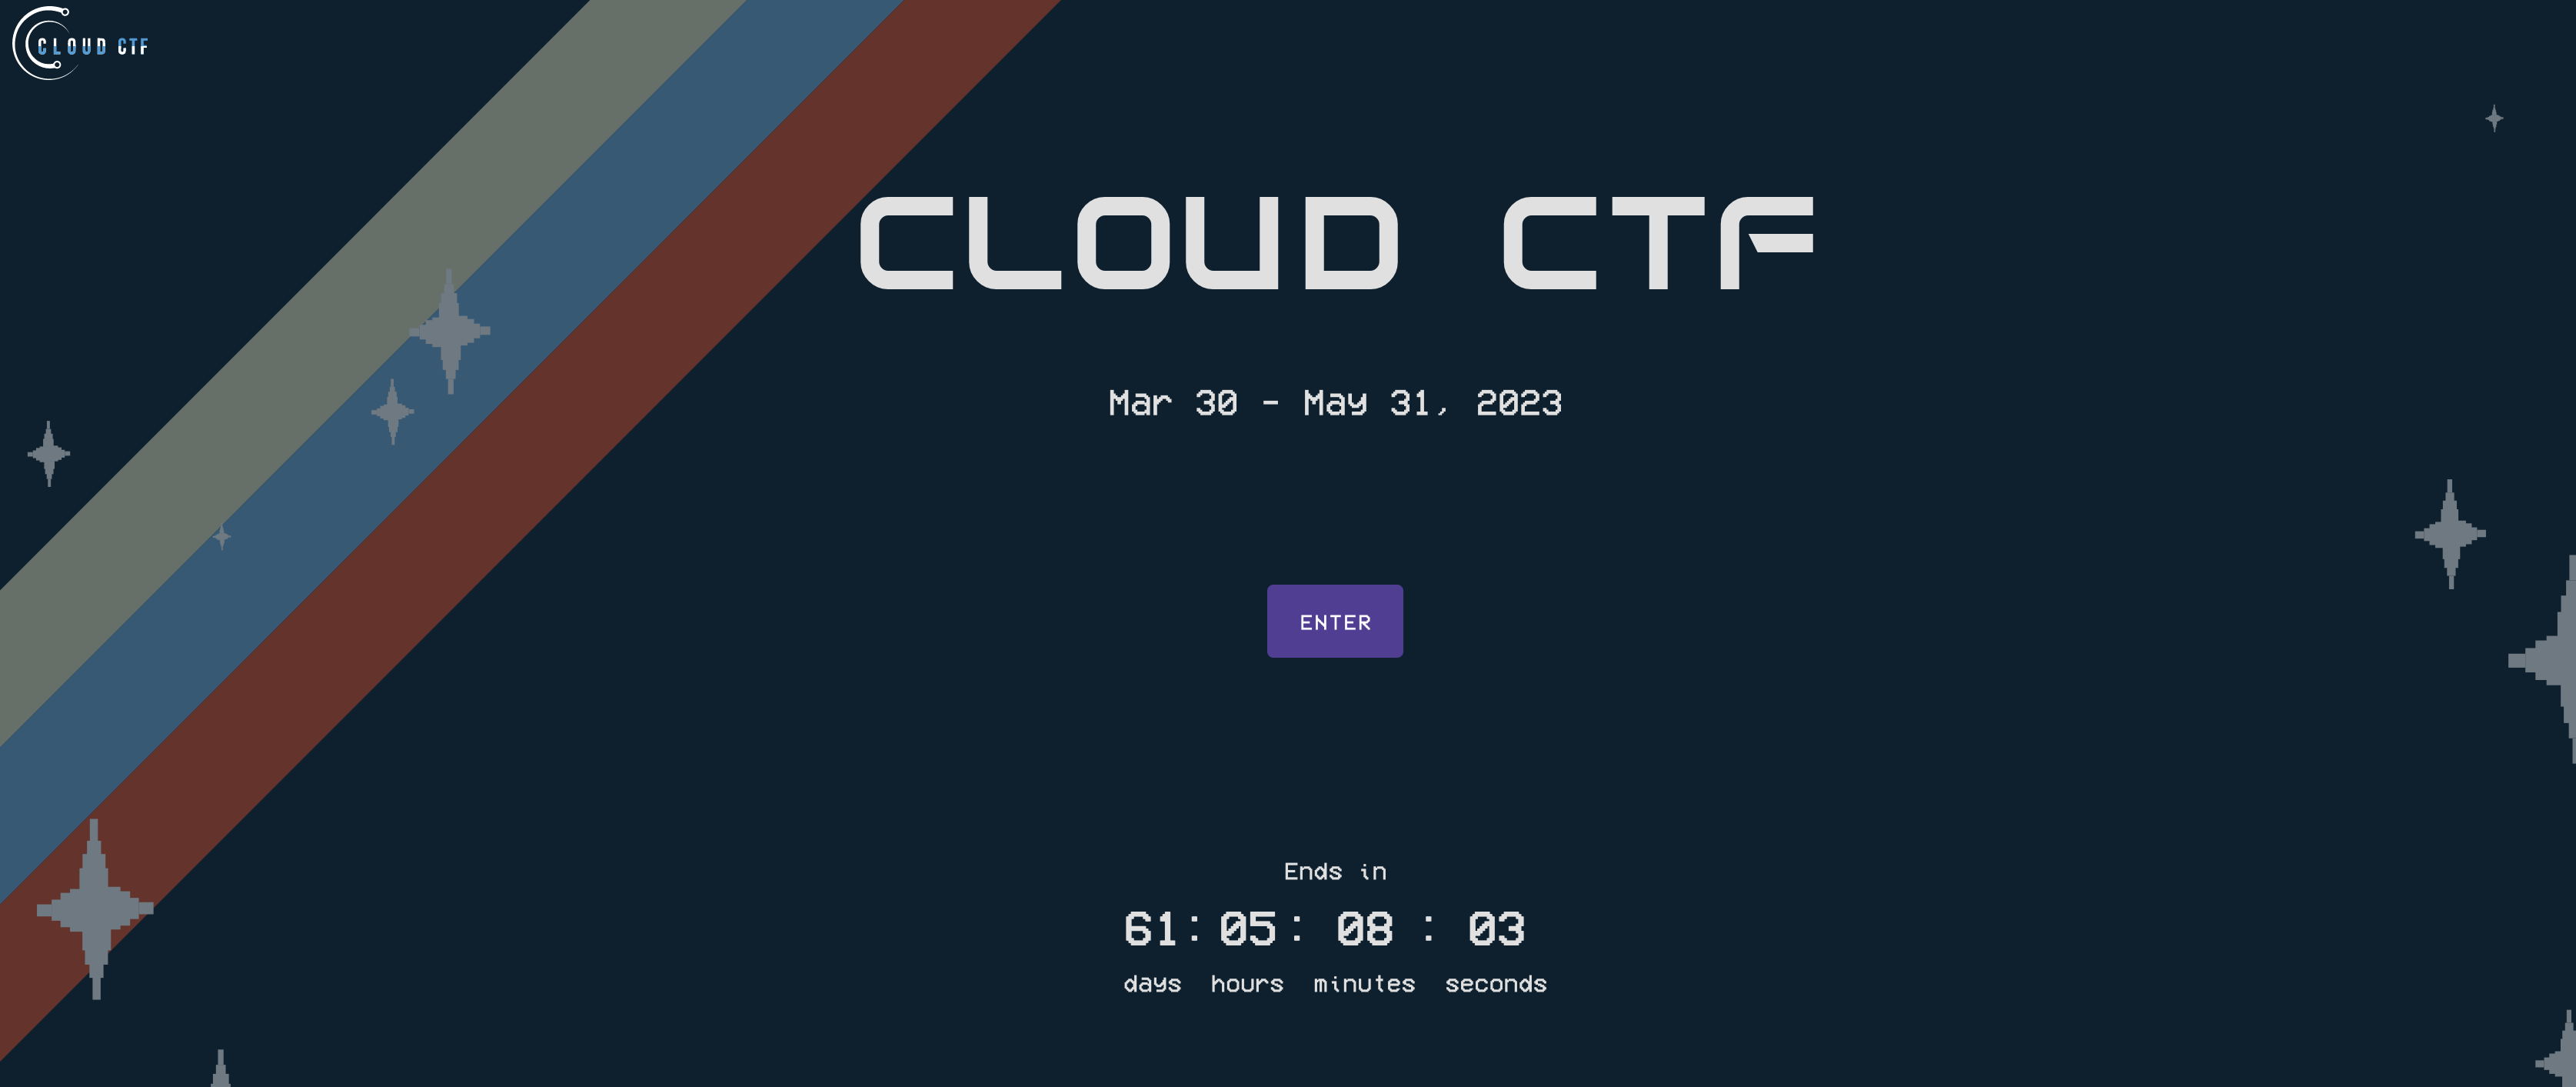 An example of a Cloud CTF start screen is shown.